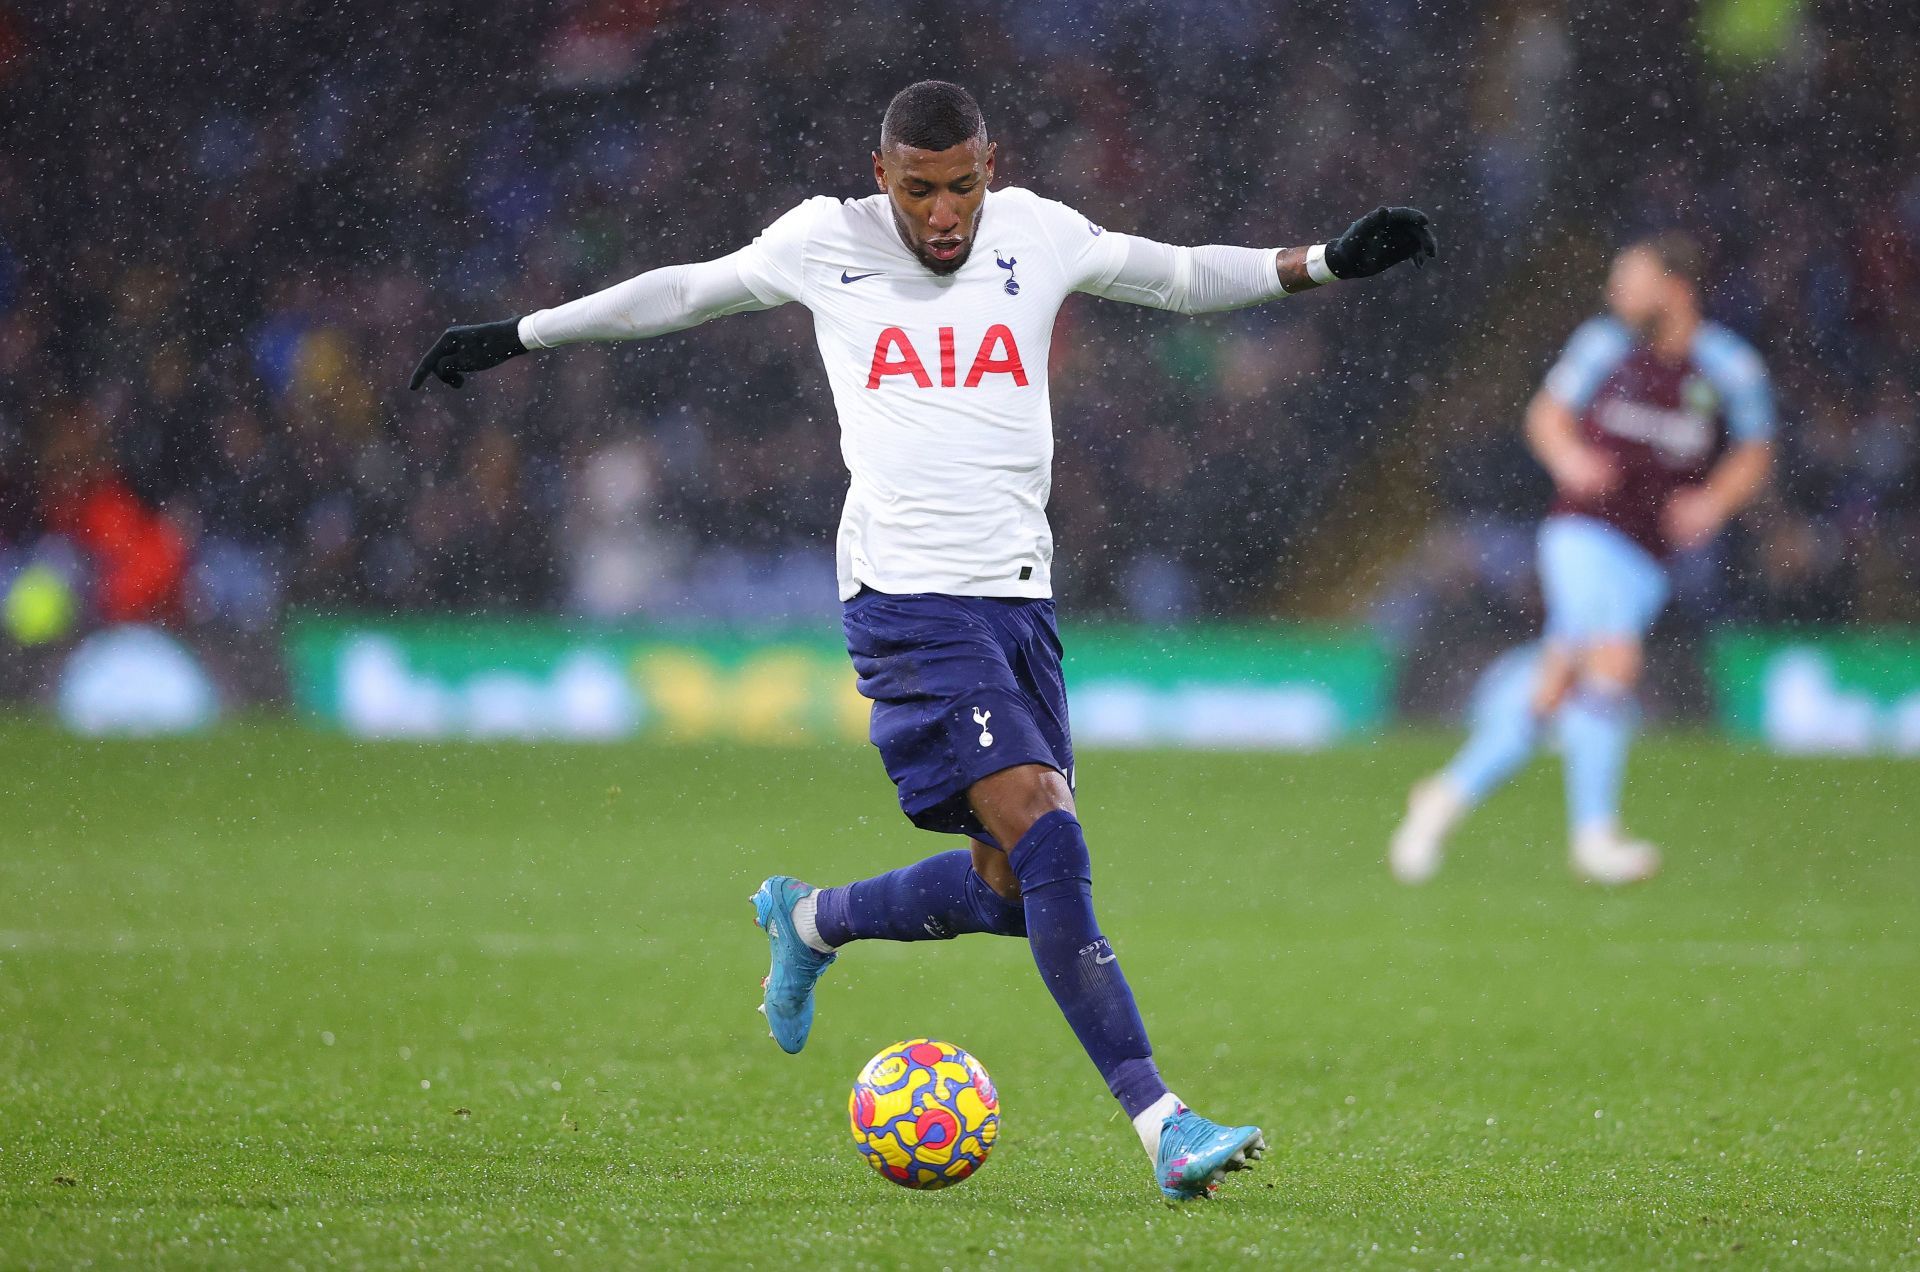 Emerson moved to Tottenham Hotspur on deadline day of the 2022 transfer window